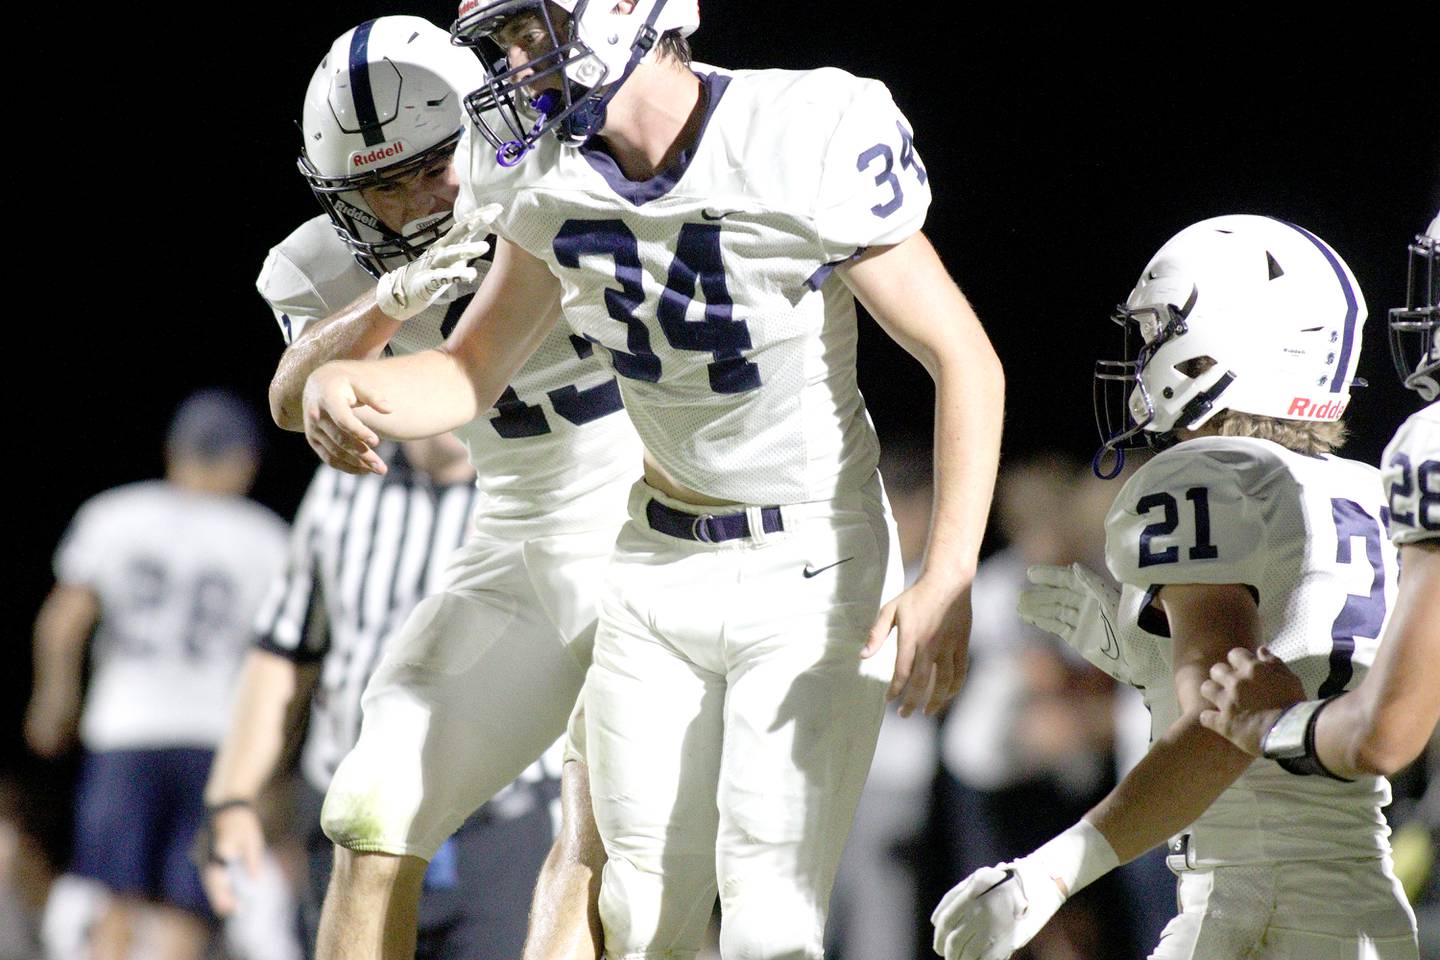 Cary-Grove’s Jack Rocen, front, and Corey Adams, back, celebrate a defensive stop in varsity football at Metcalf Field in Crystal Lake Friday night.